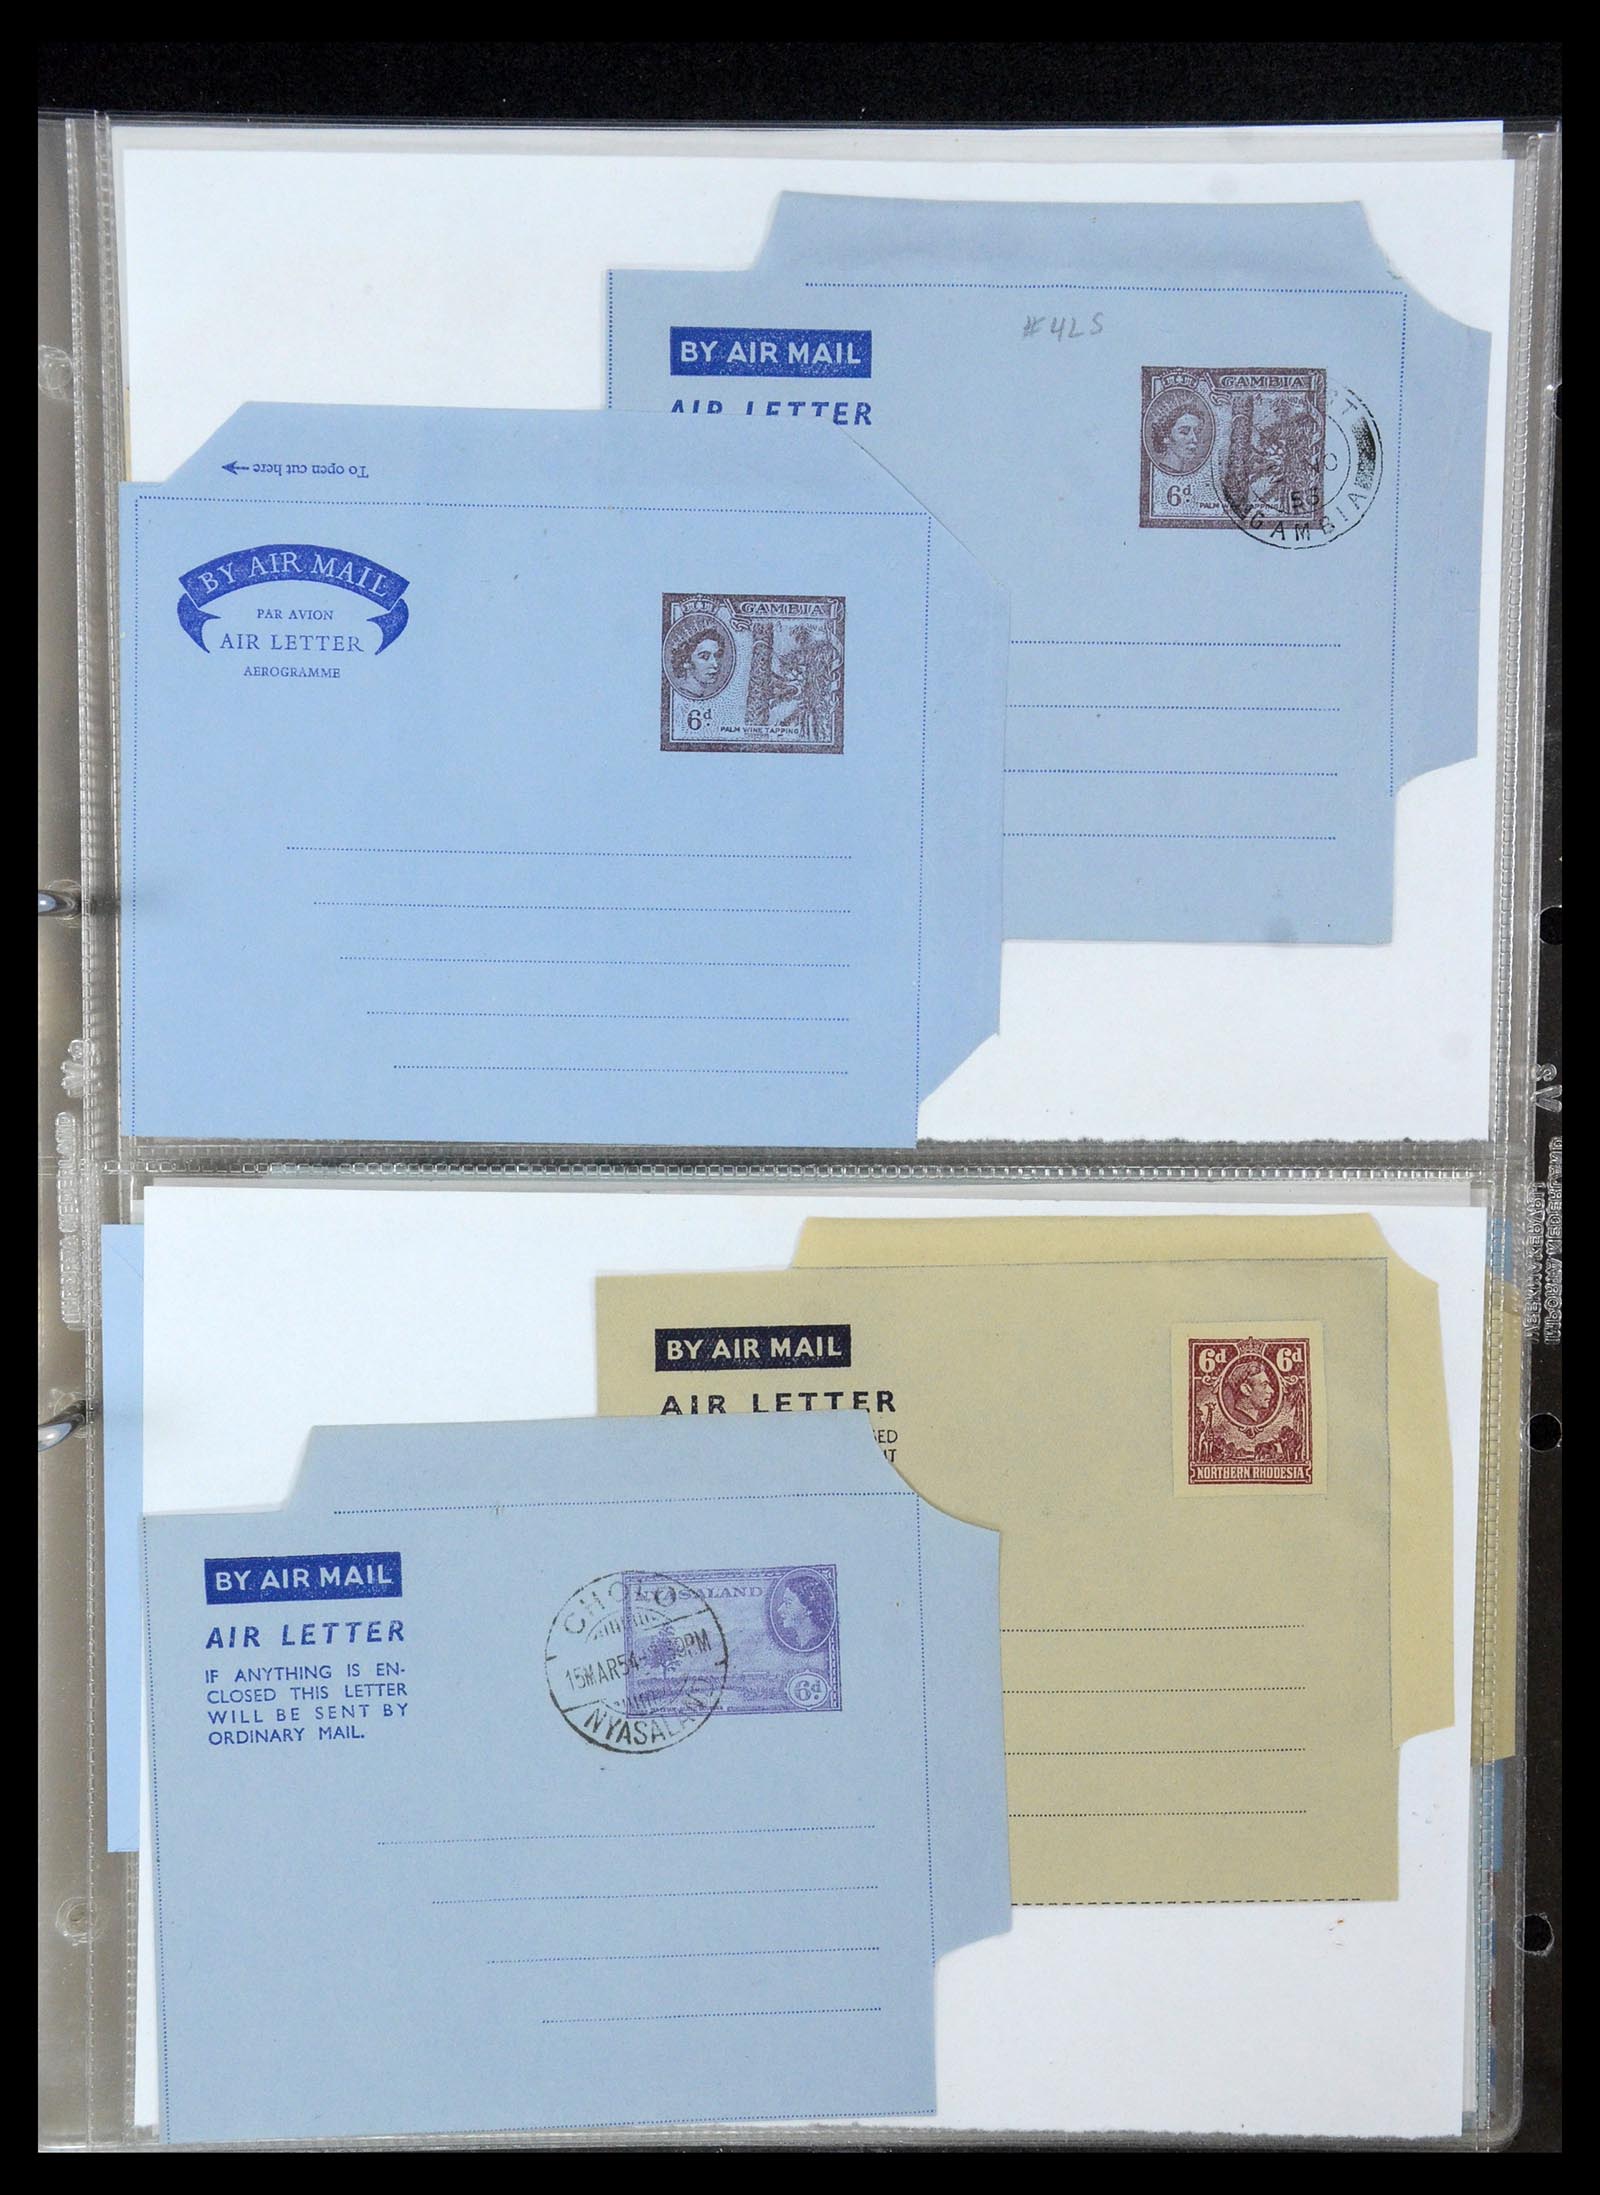 35608 096 - Stamp Collection 35608 Air letter sheets.